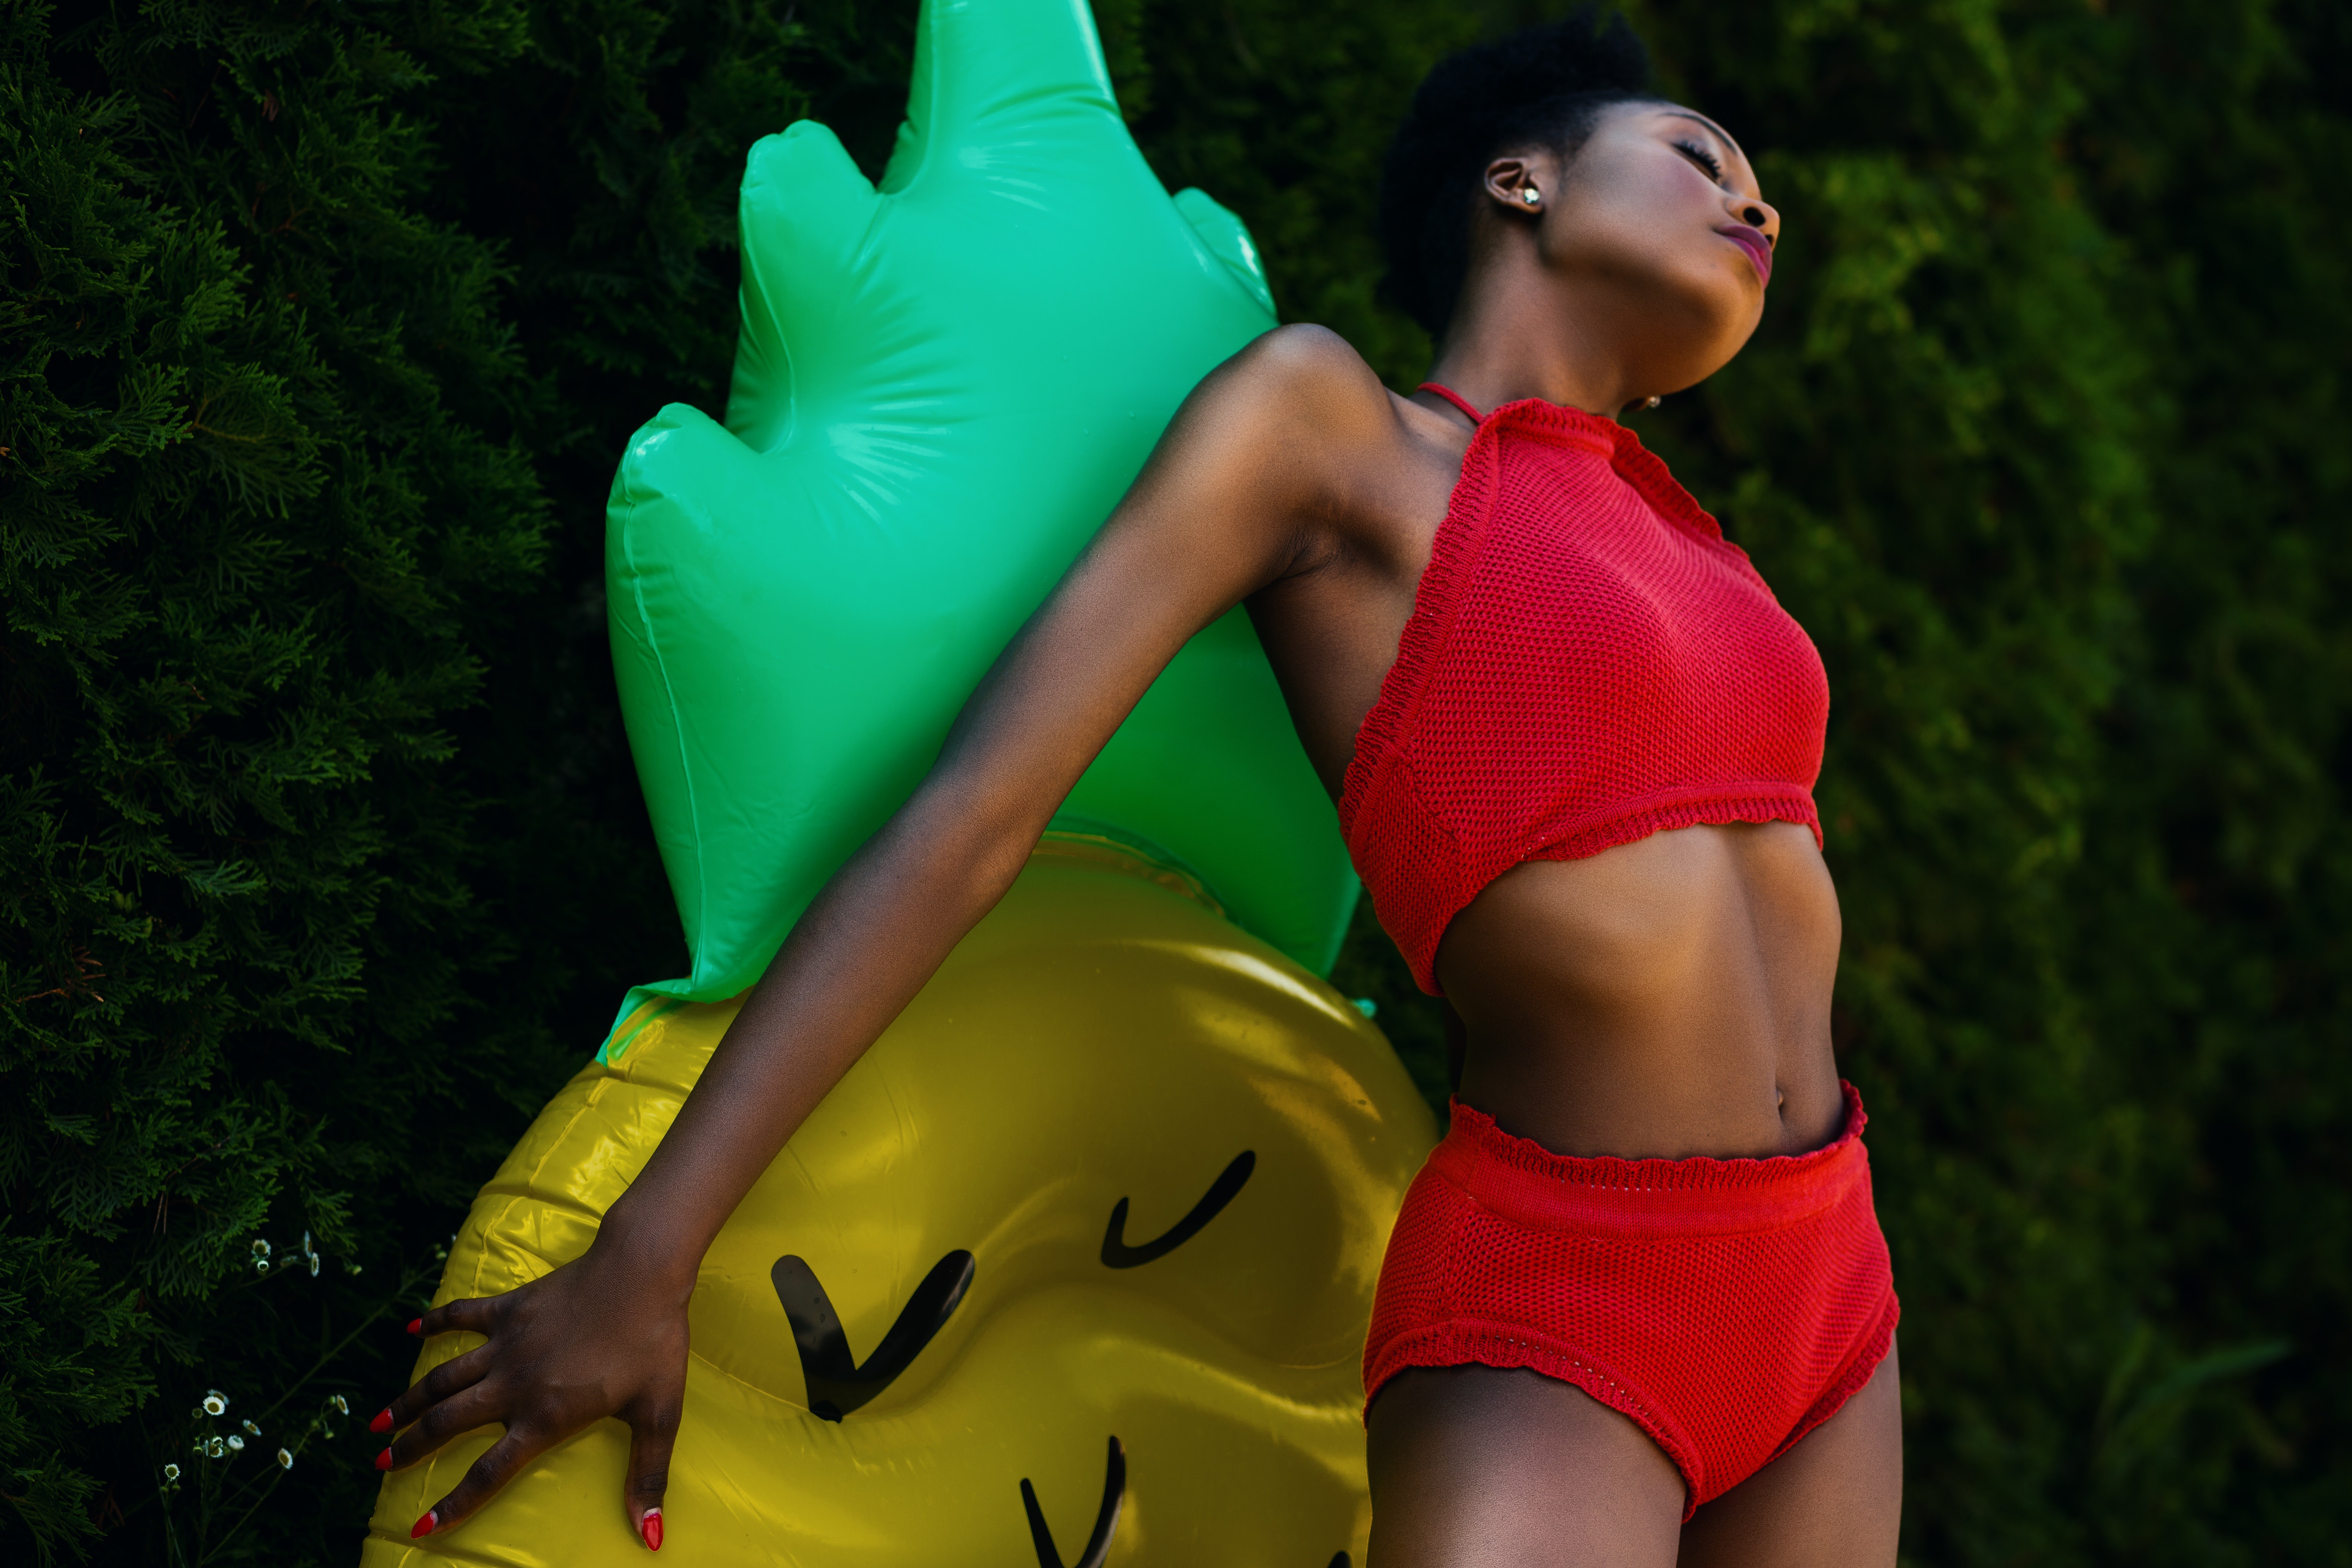 Woman wearing red top and bottoms leaning on yellow and green inflatable standee photo